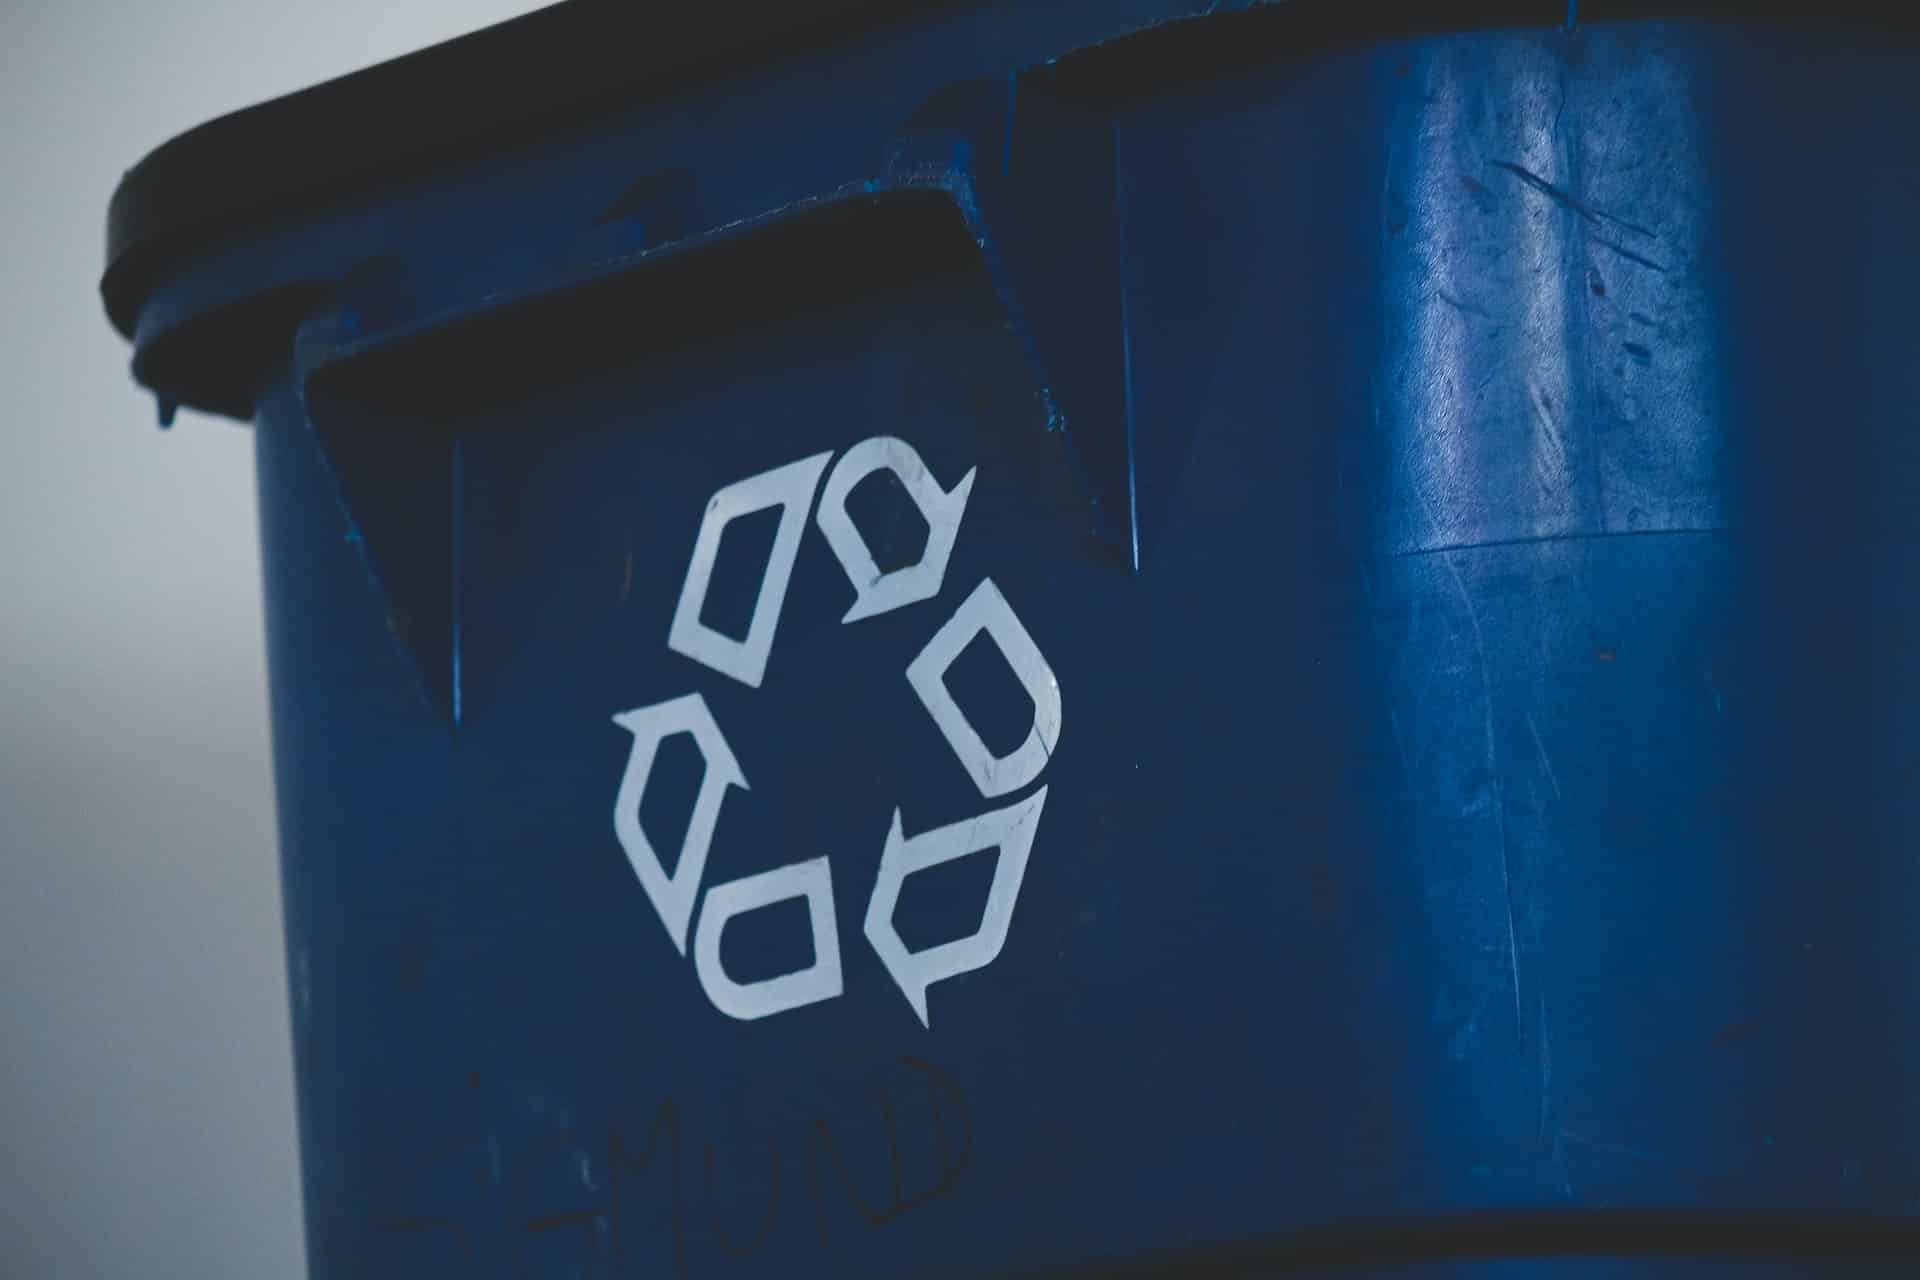 Recycle Club Shipping Label